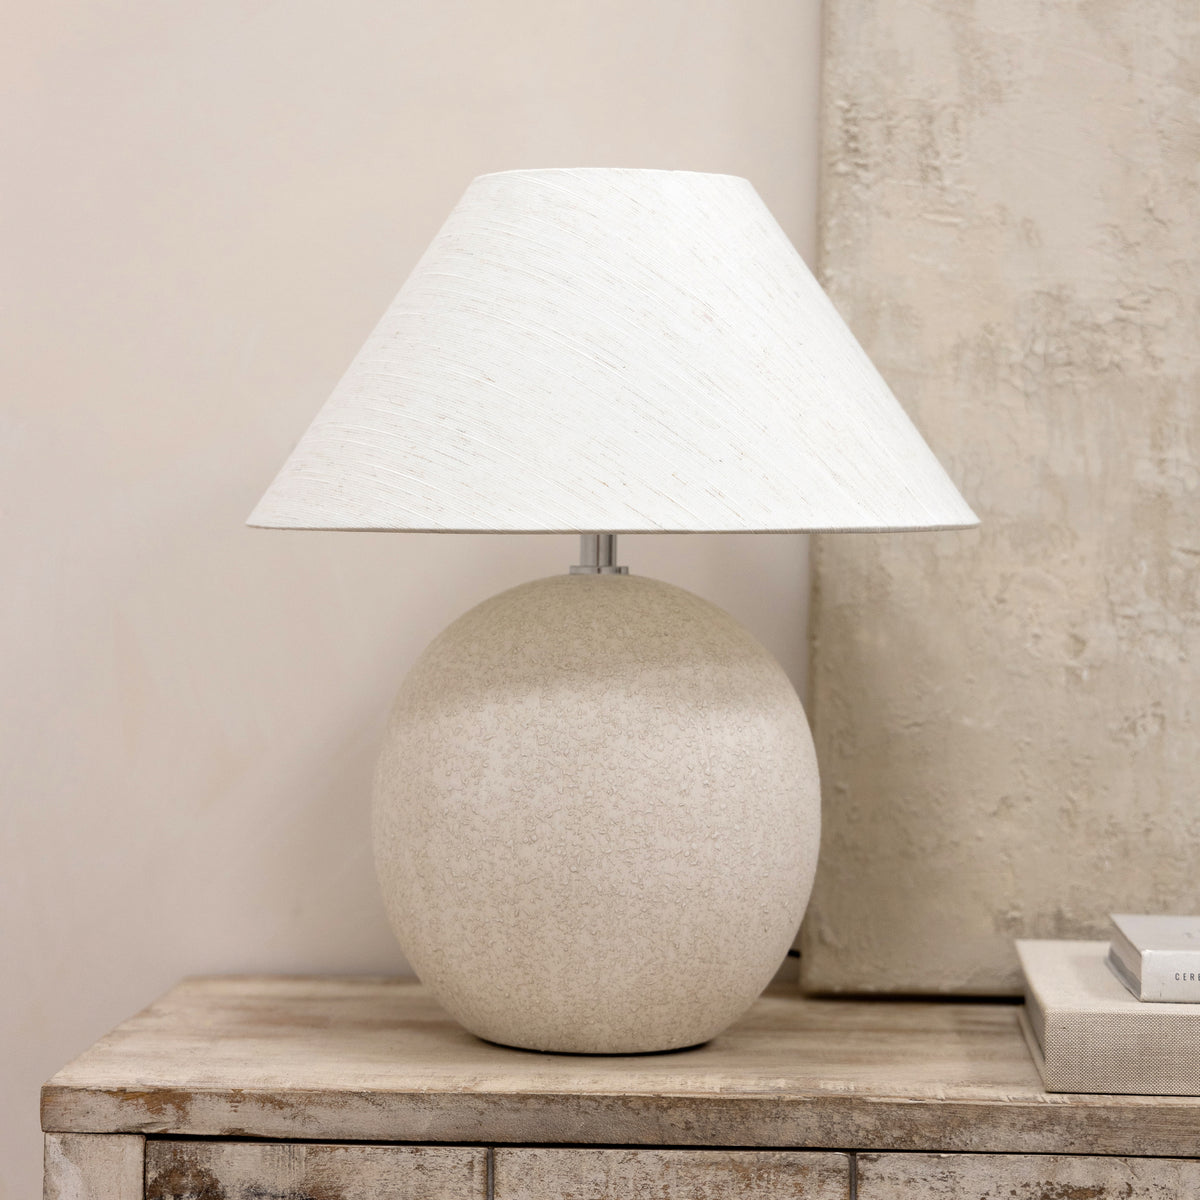 Stone ceramic coolie shade table lamp on console table